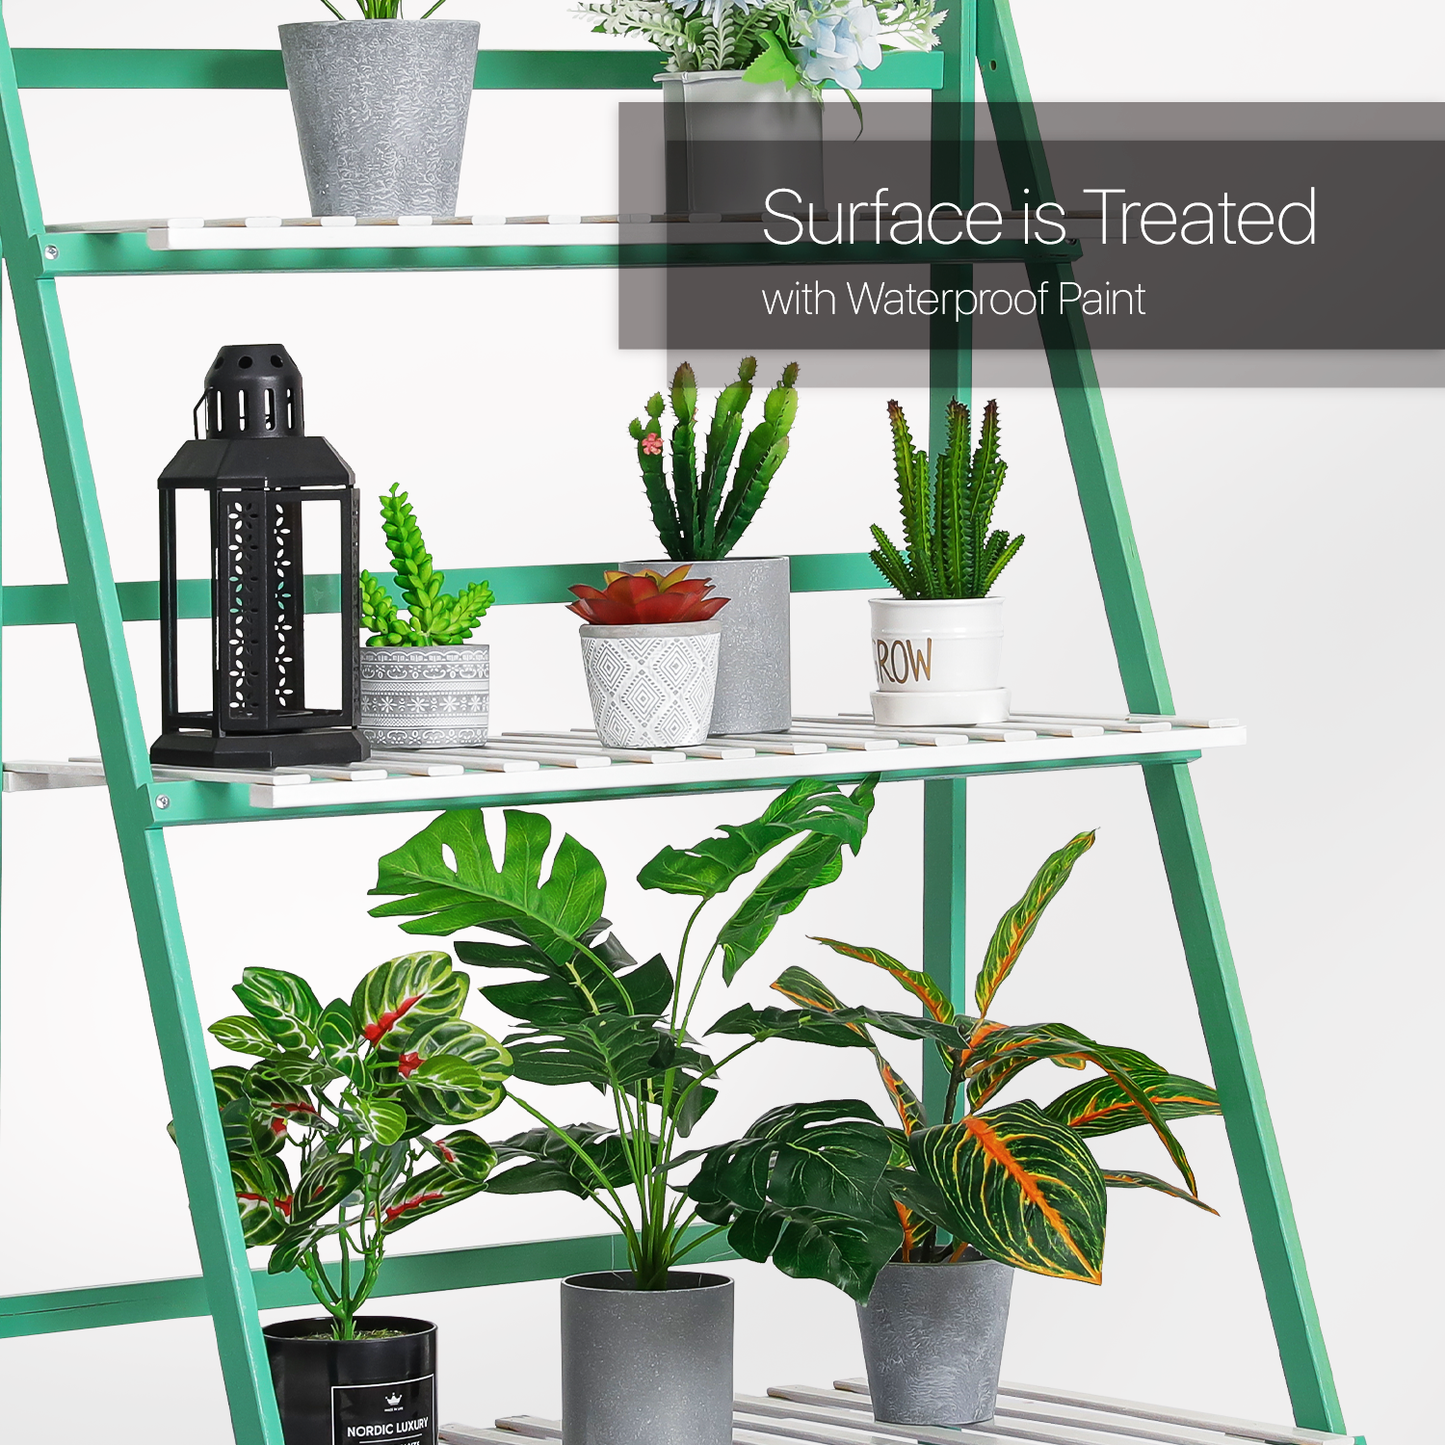 Foldable Flower Plant Rack - A Frame Stand Shelf - with Top Hanging Rod - 3 Tier - Green/White